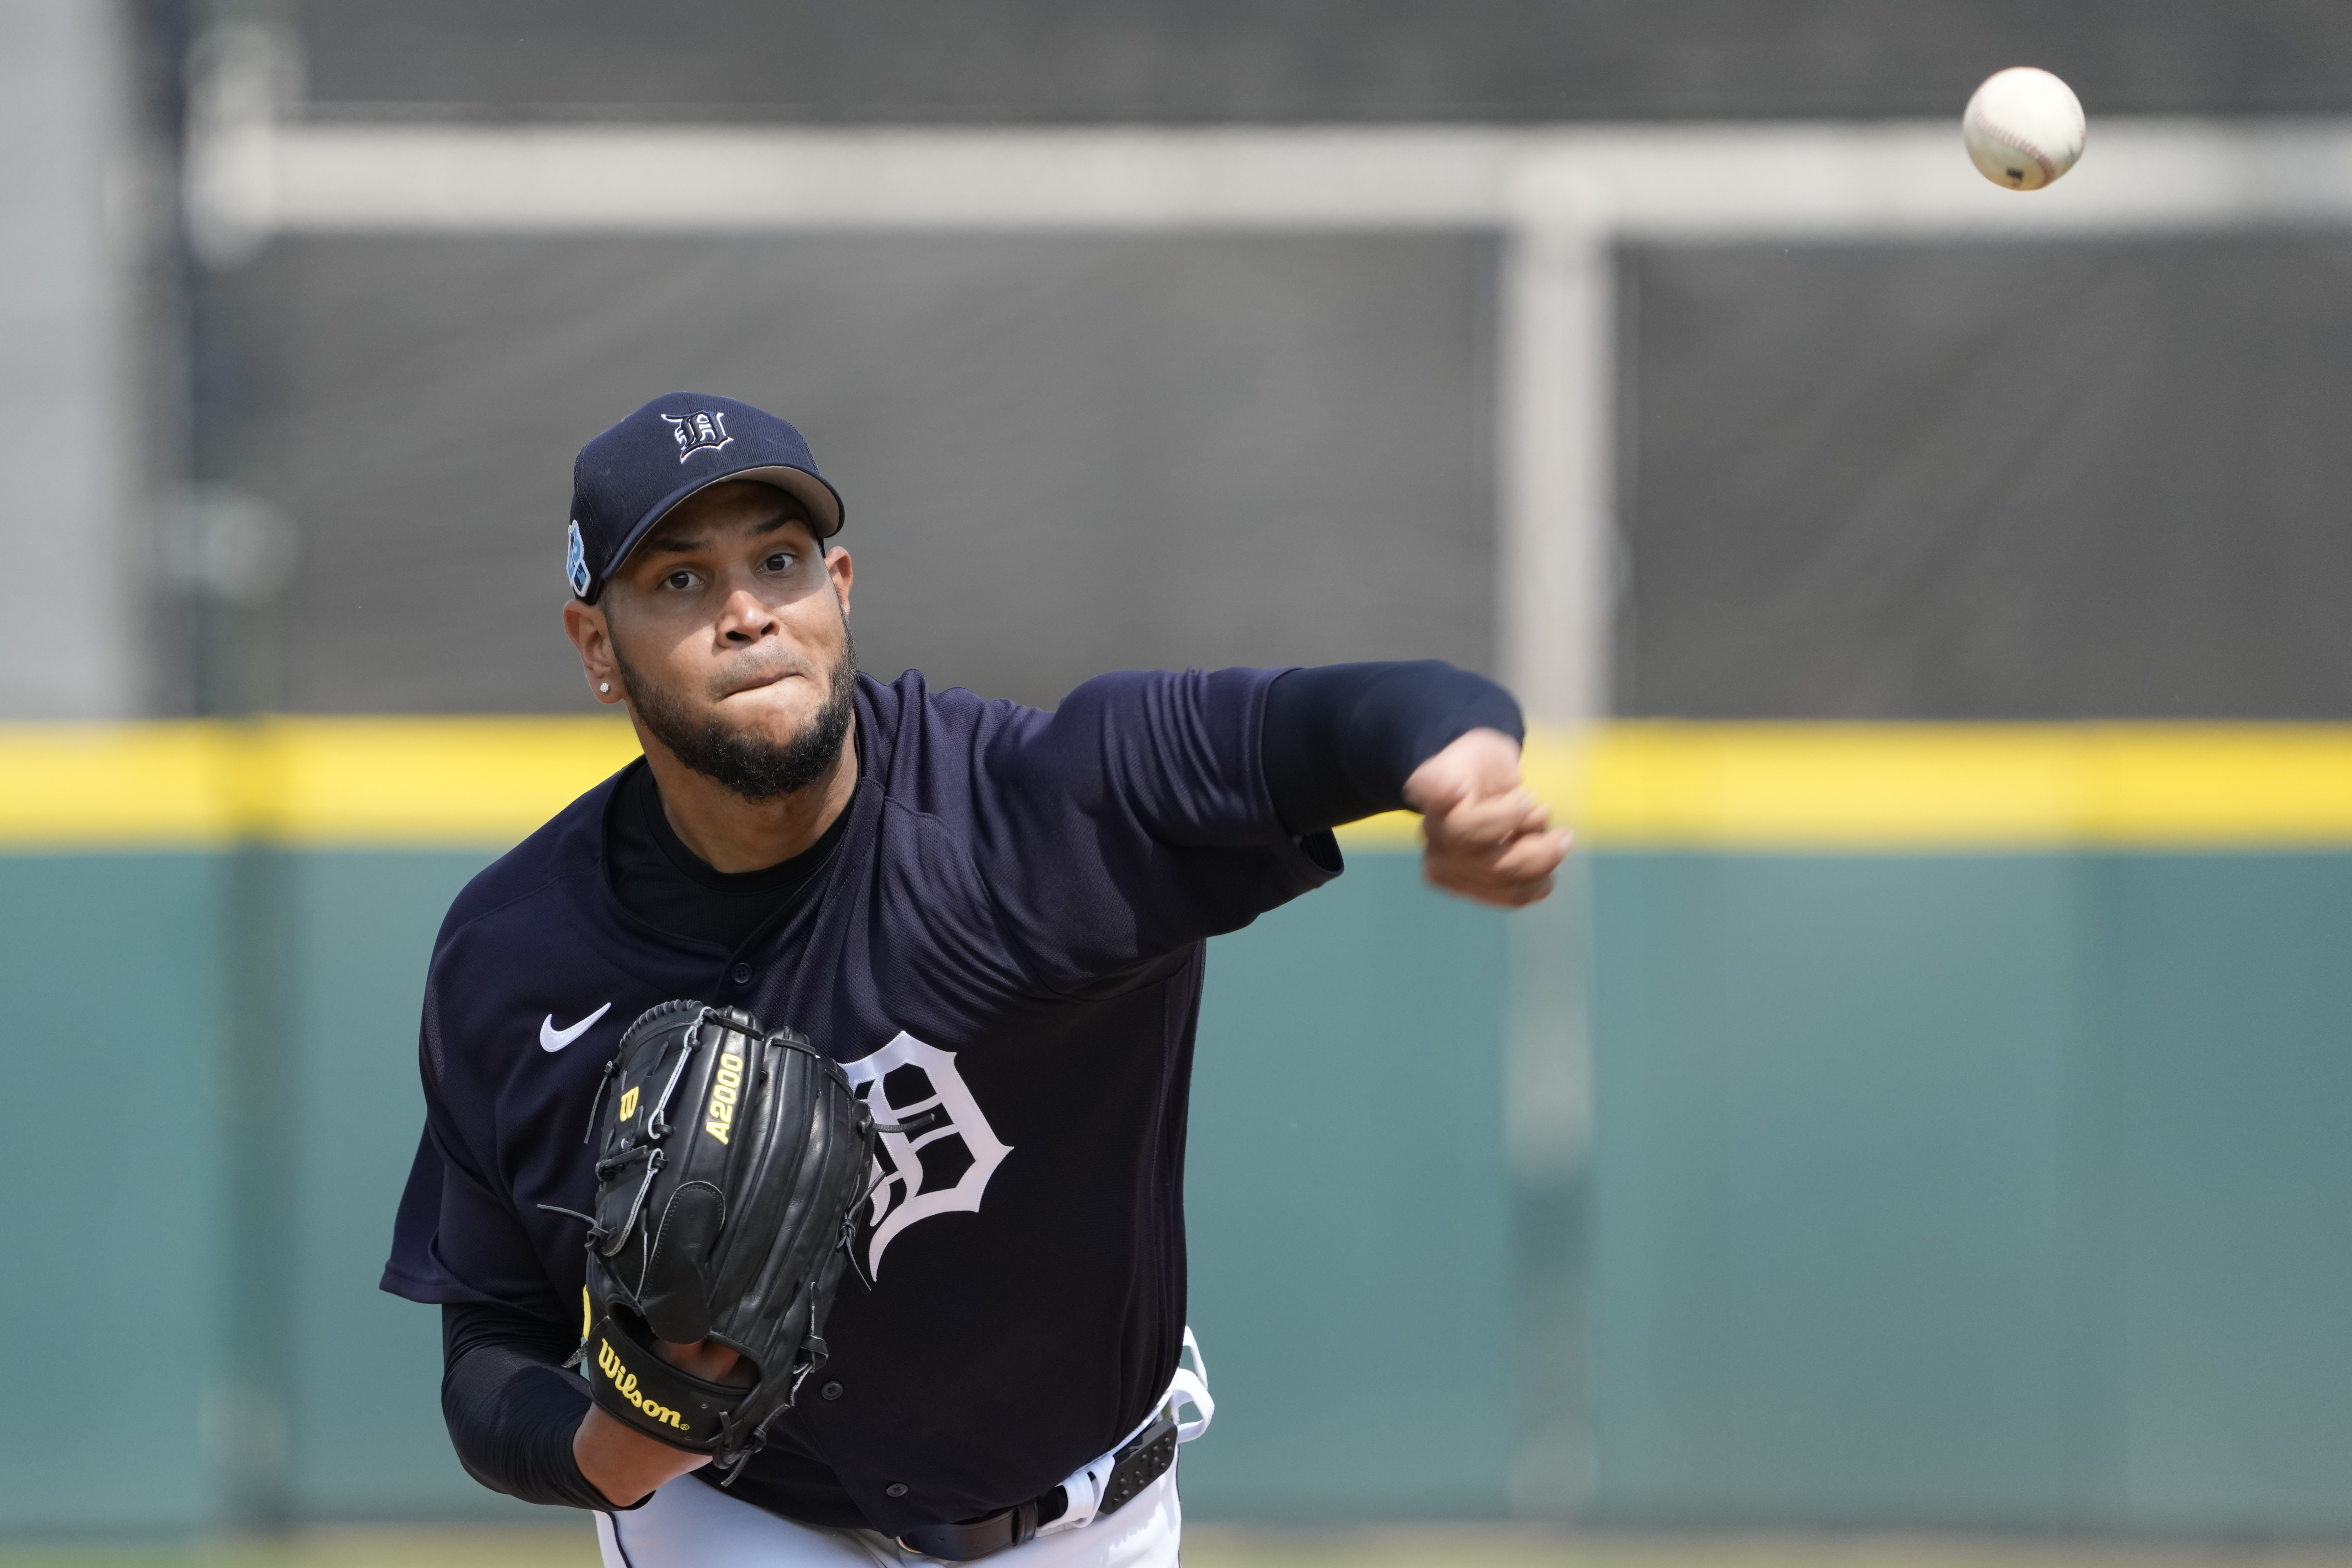 Tigers announce Eduardo Rodríguez as Opening Day starter – The Perspective